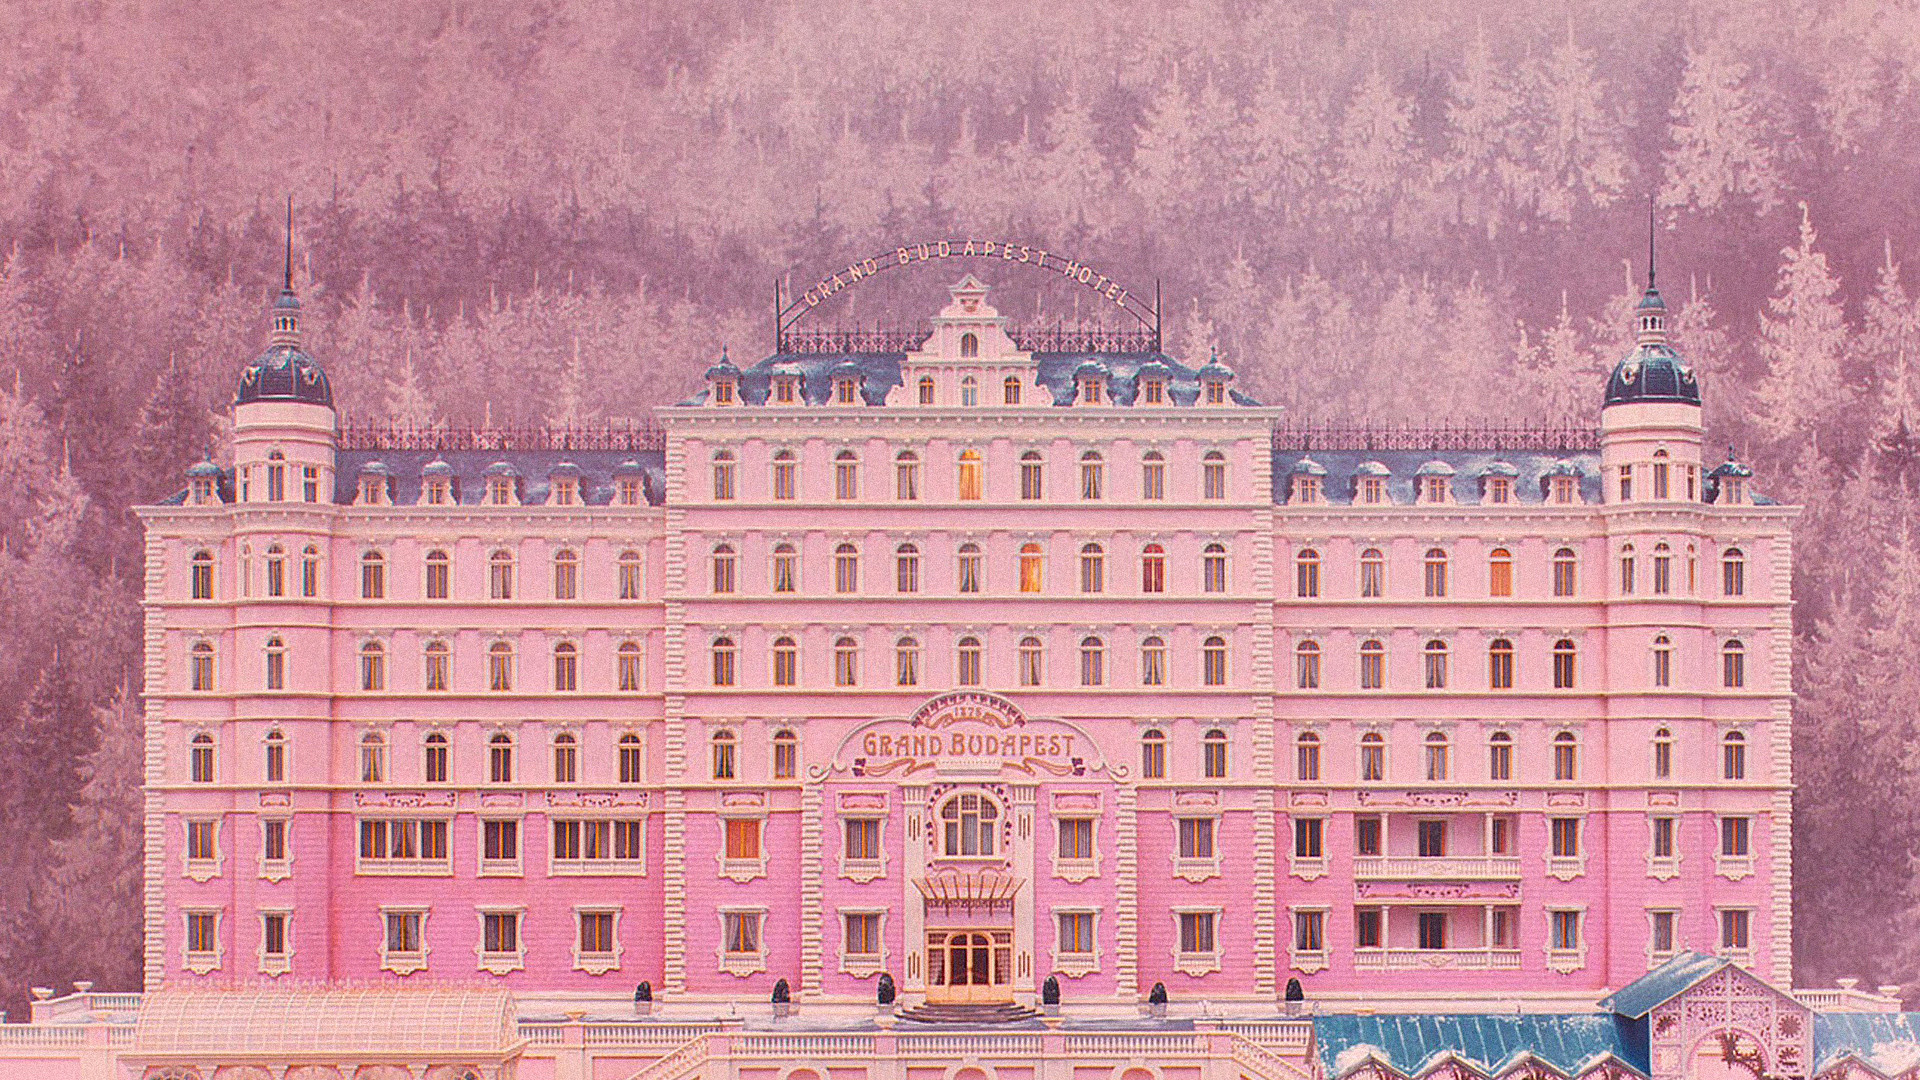 wes anderson wallpaper,pink,building,palace,landmark,architecture